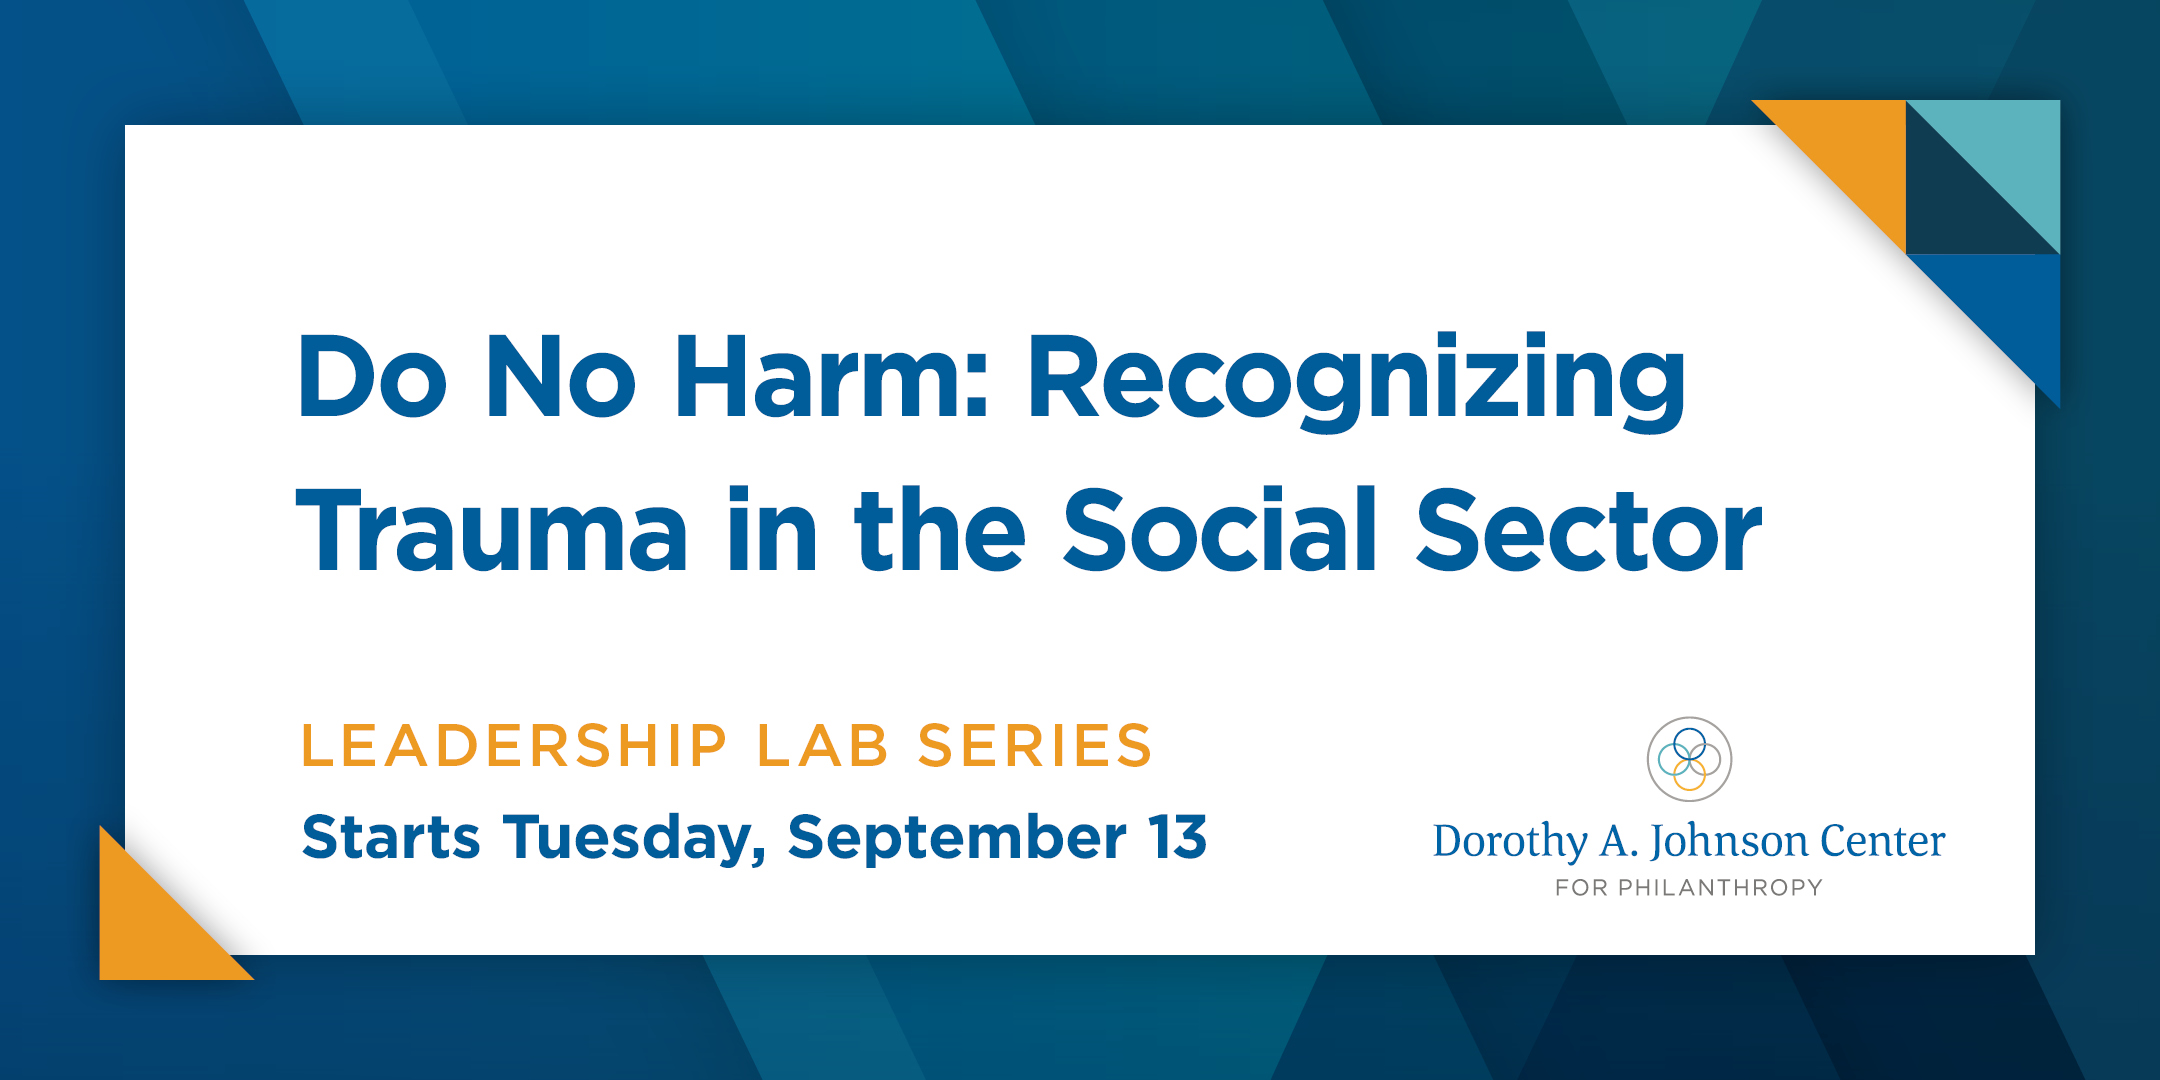 Do No Harm: Recognizing Trauma in the Social Sector